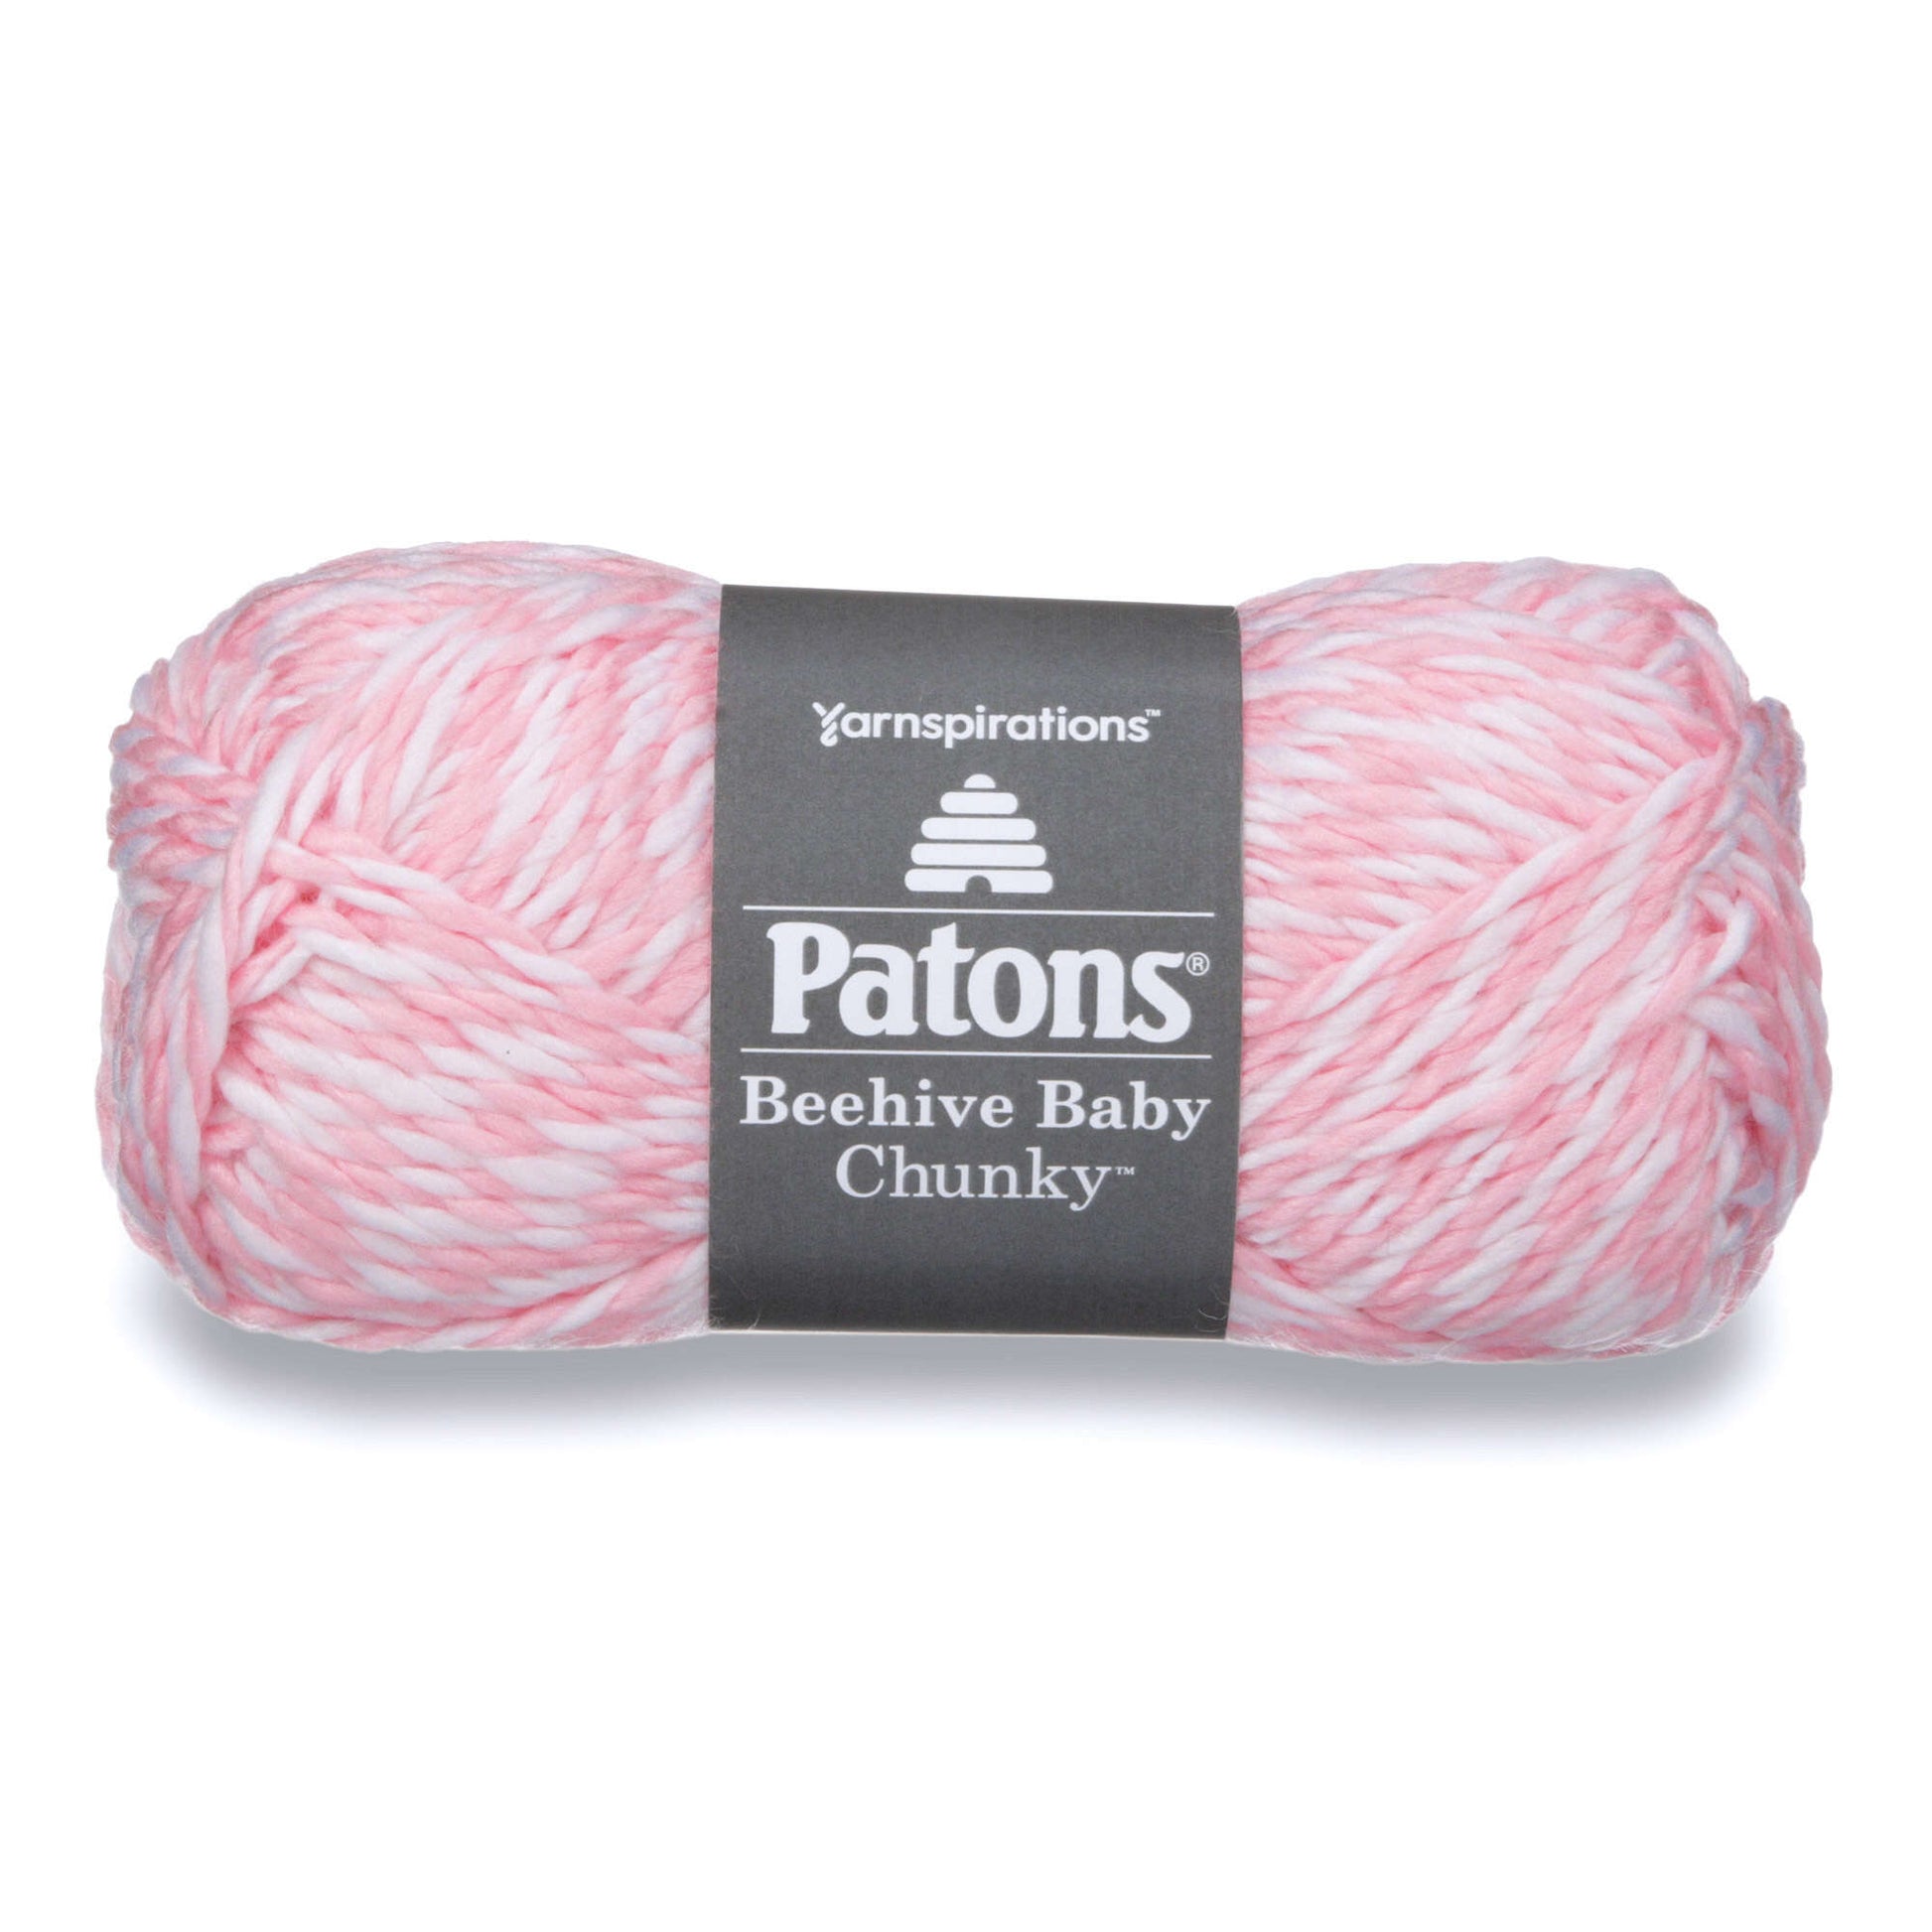 Patons Beehive Baby Sport Yarn - Discontinued Shades